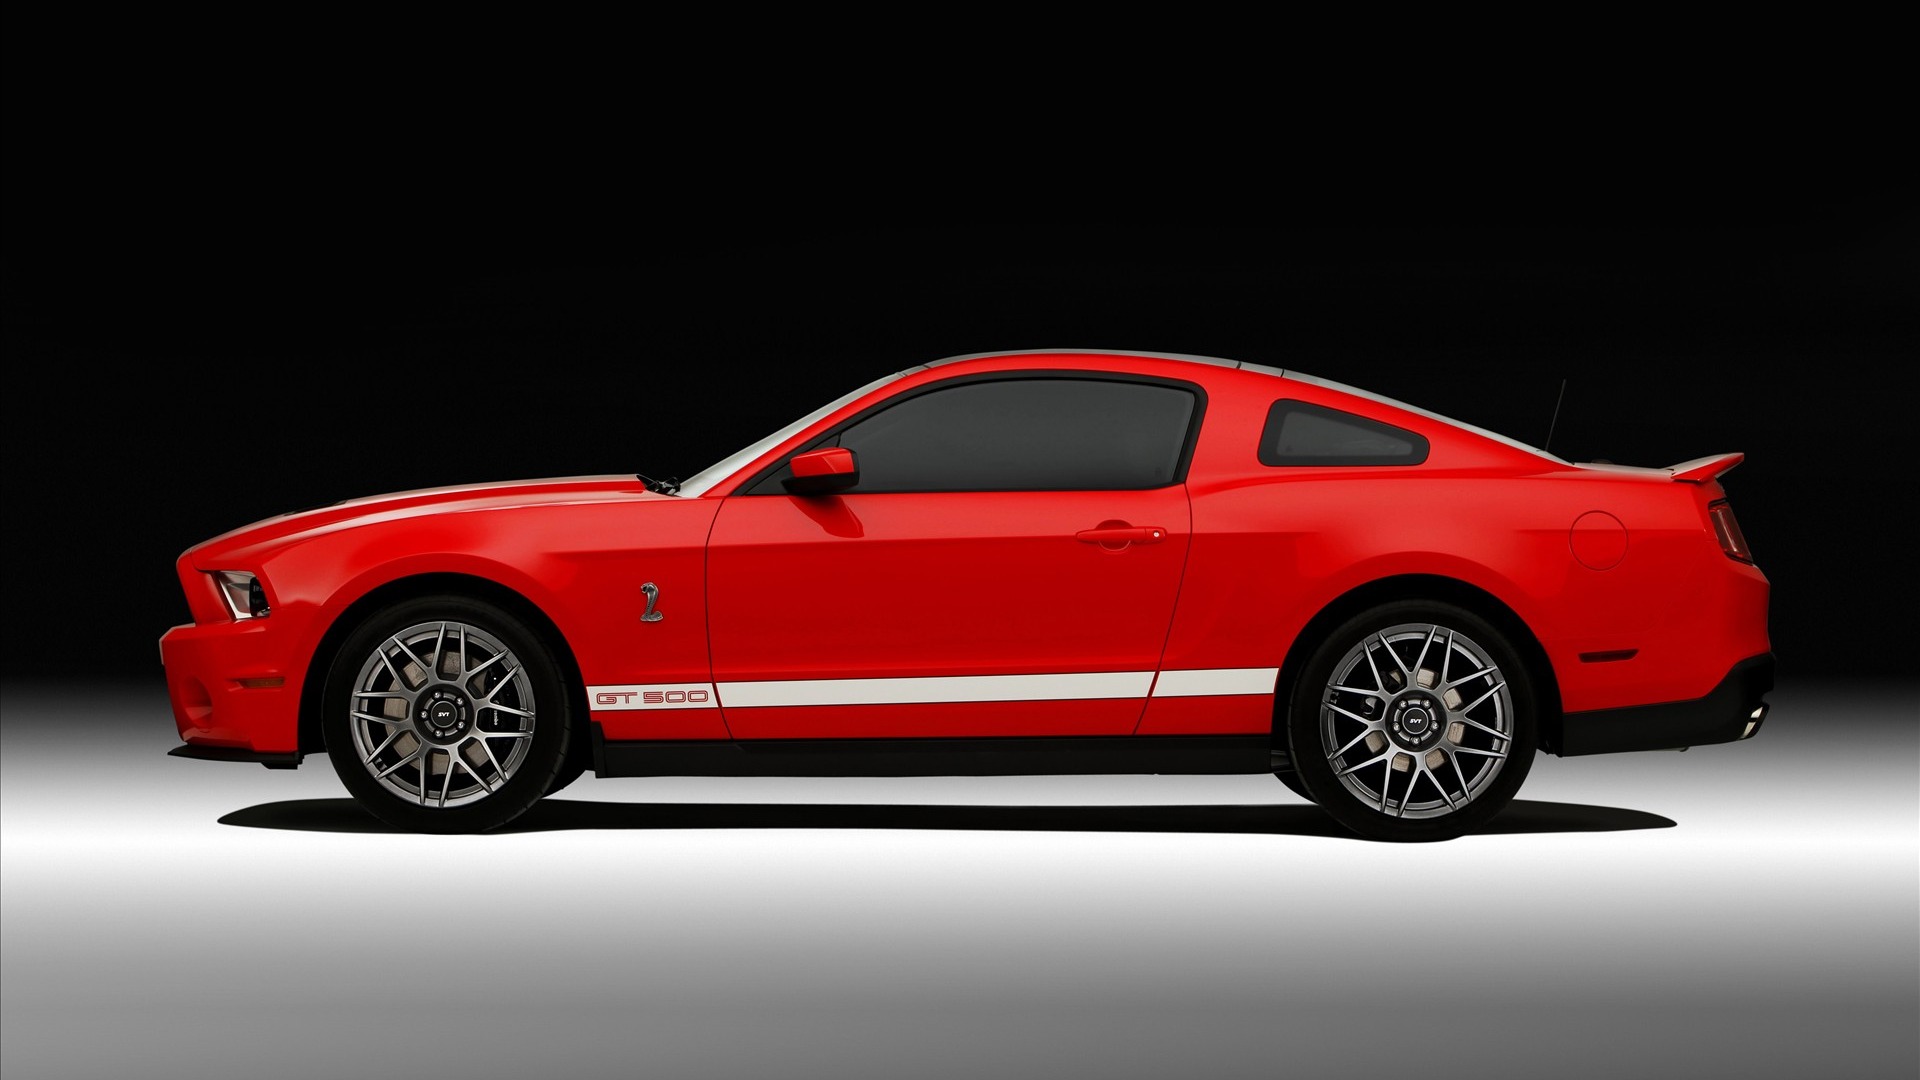 Ford Mustang GT500 Wallpapers #6 - 1920x1080